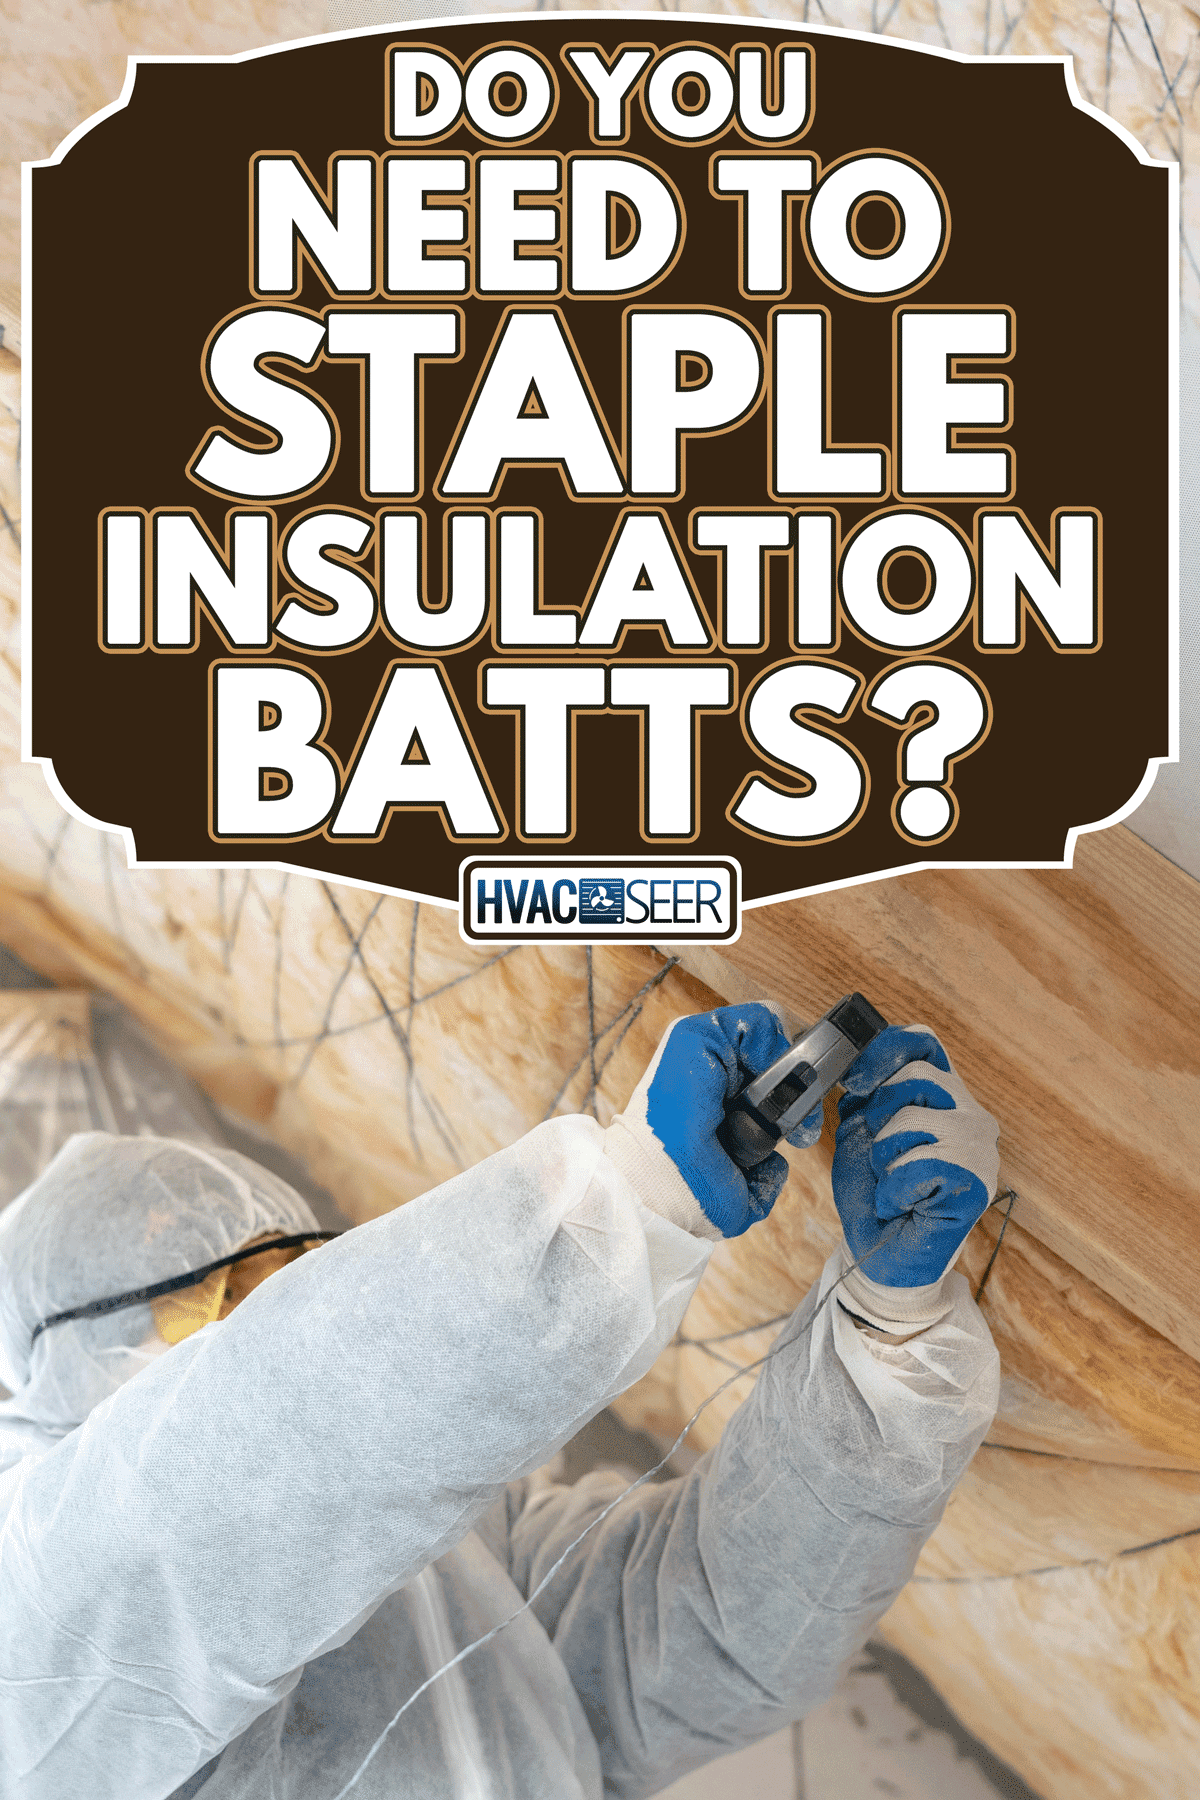 Foreman in overalls working with batt insulation, Do You Need To Staple Insulation Batts?